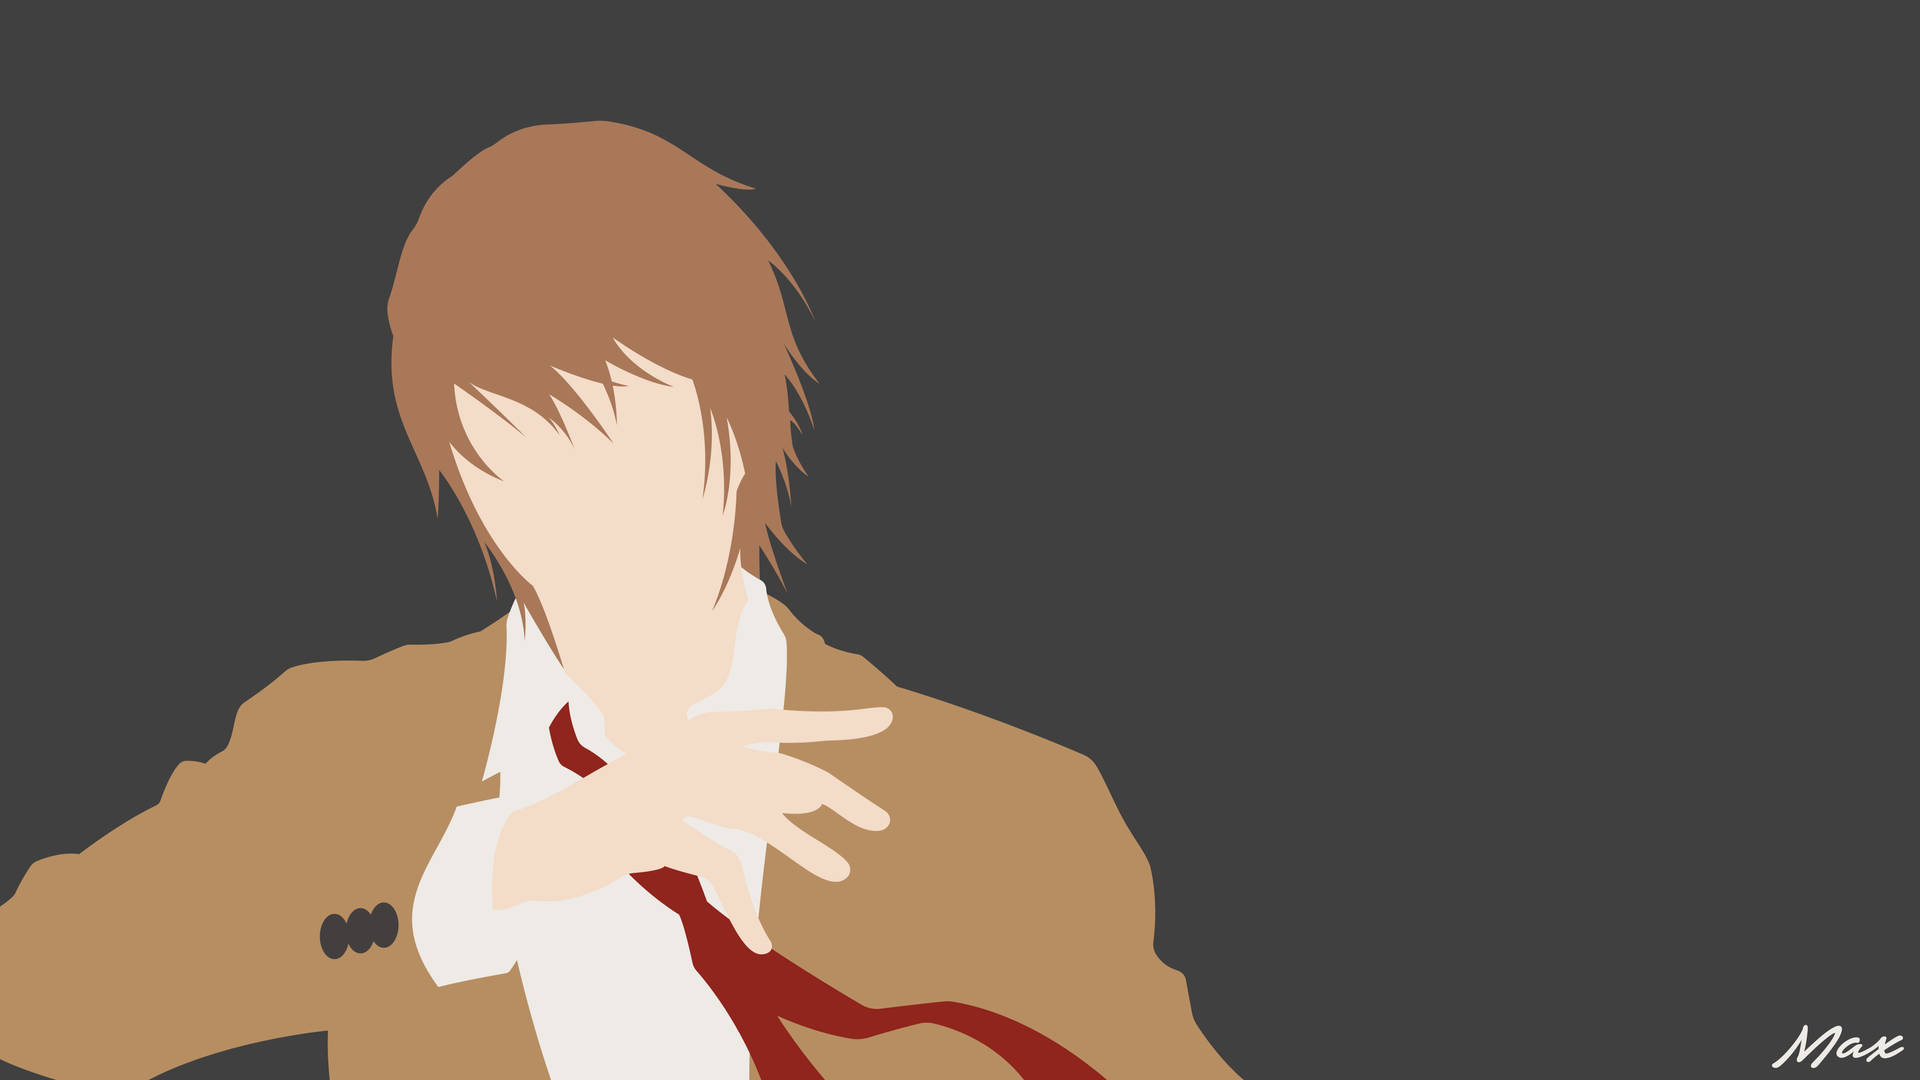 Light Yagami: The Protagonist With A Twist